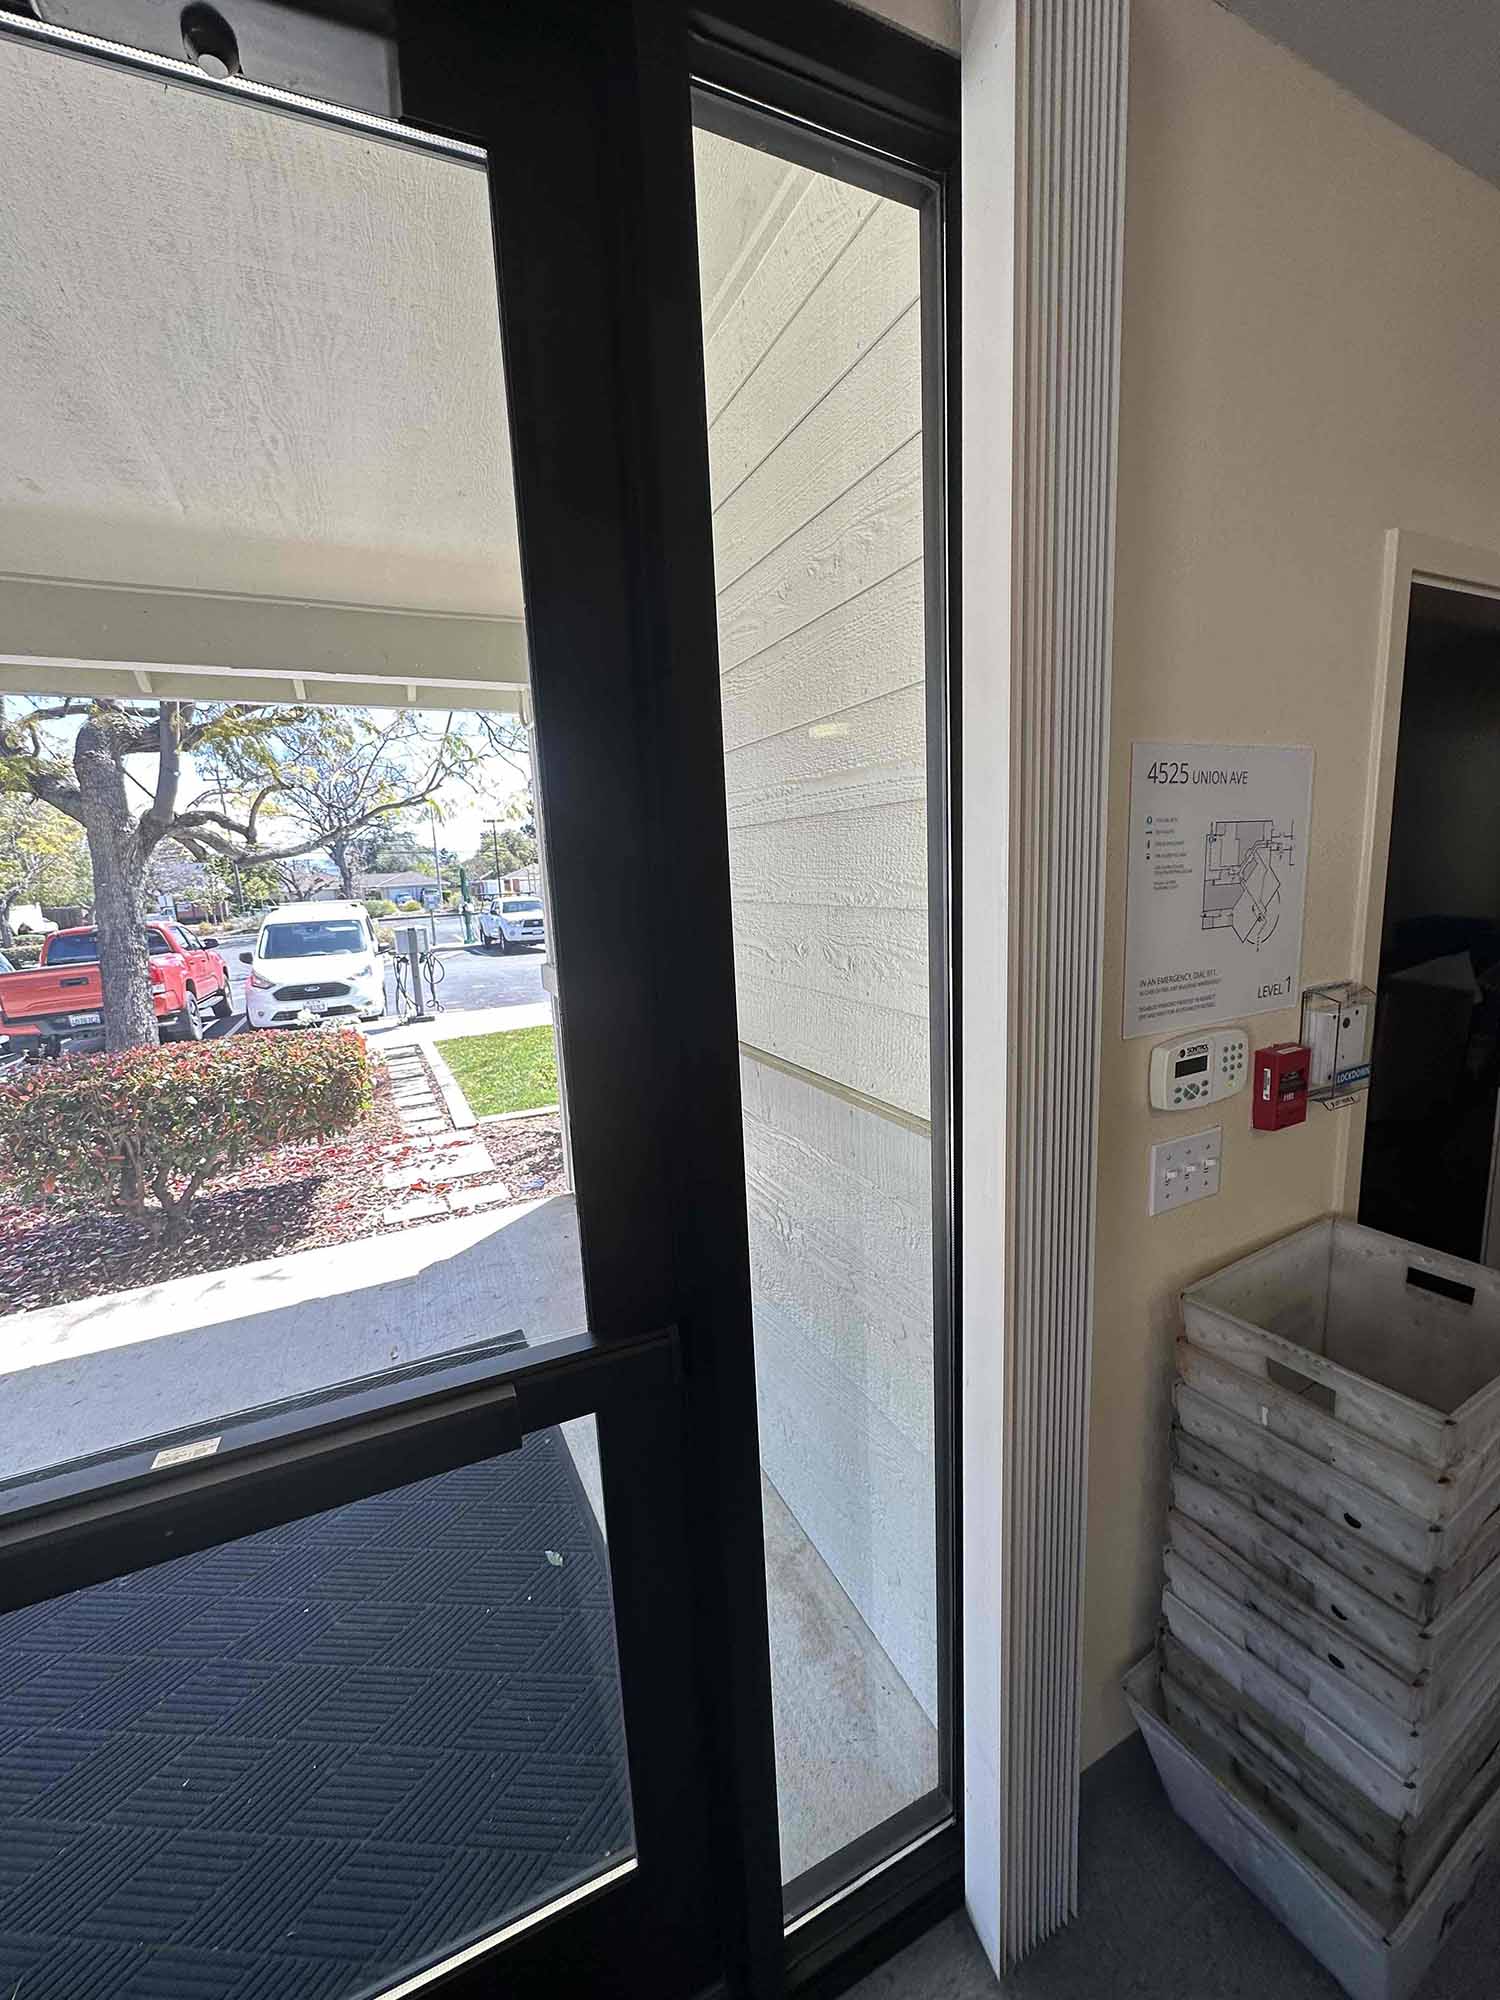 3M Safety and Security Film for a San Jose School. Installed by ClimatePro. Get a free estimate.